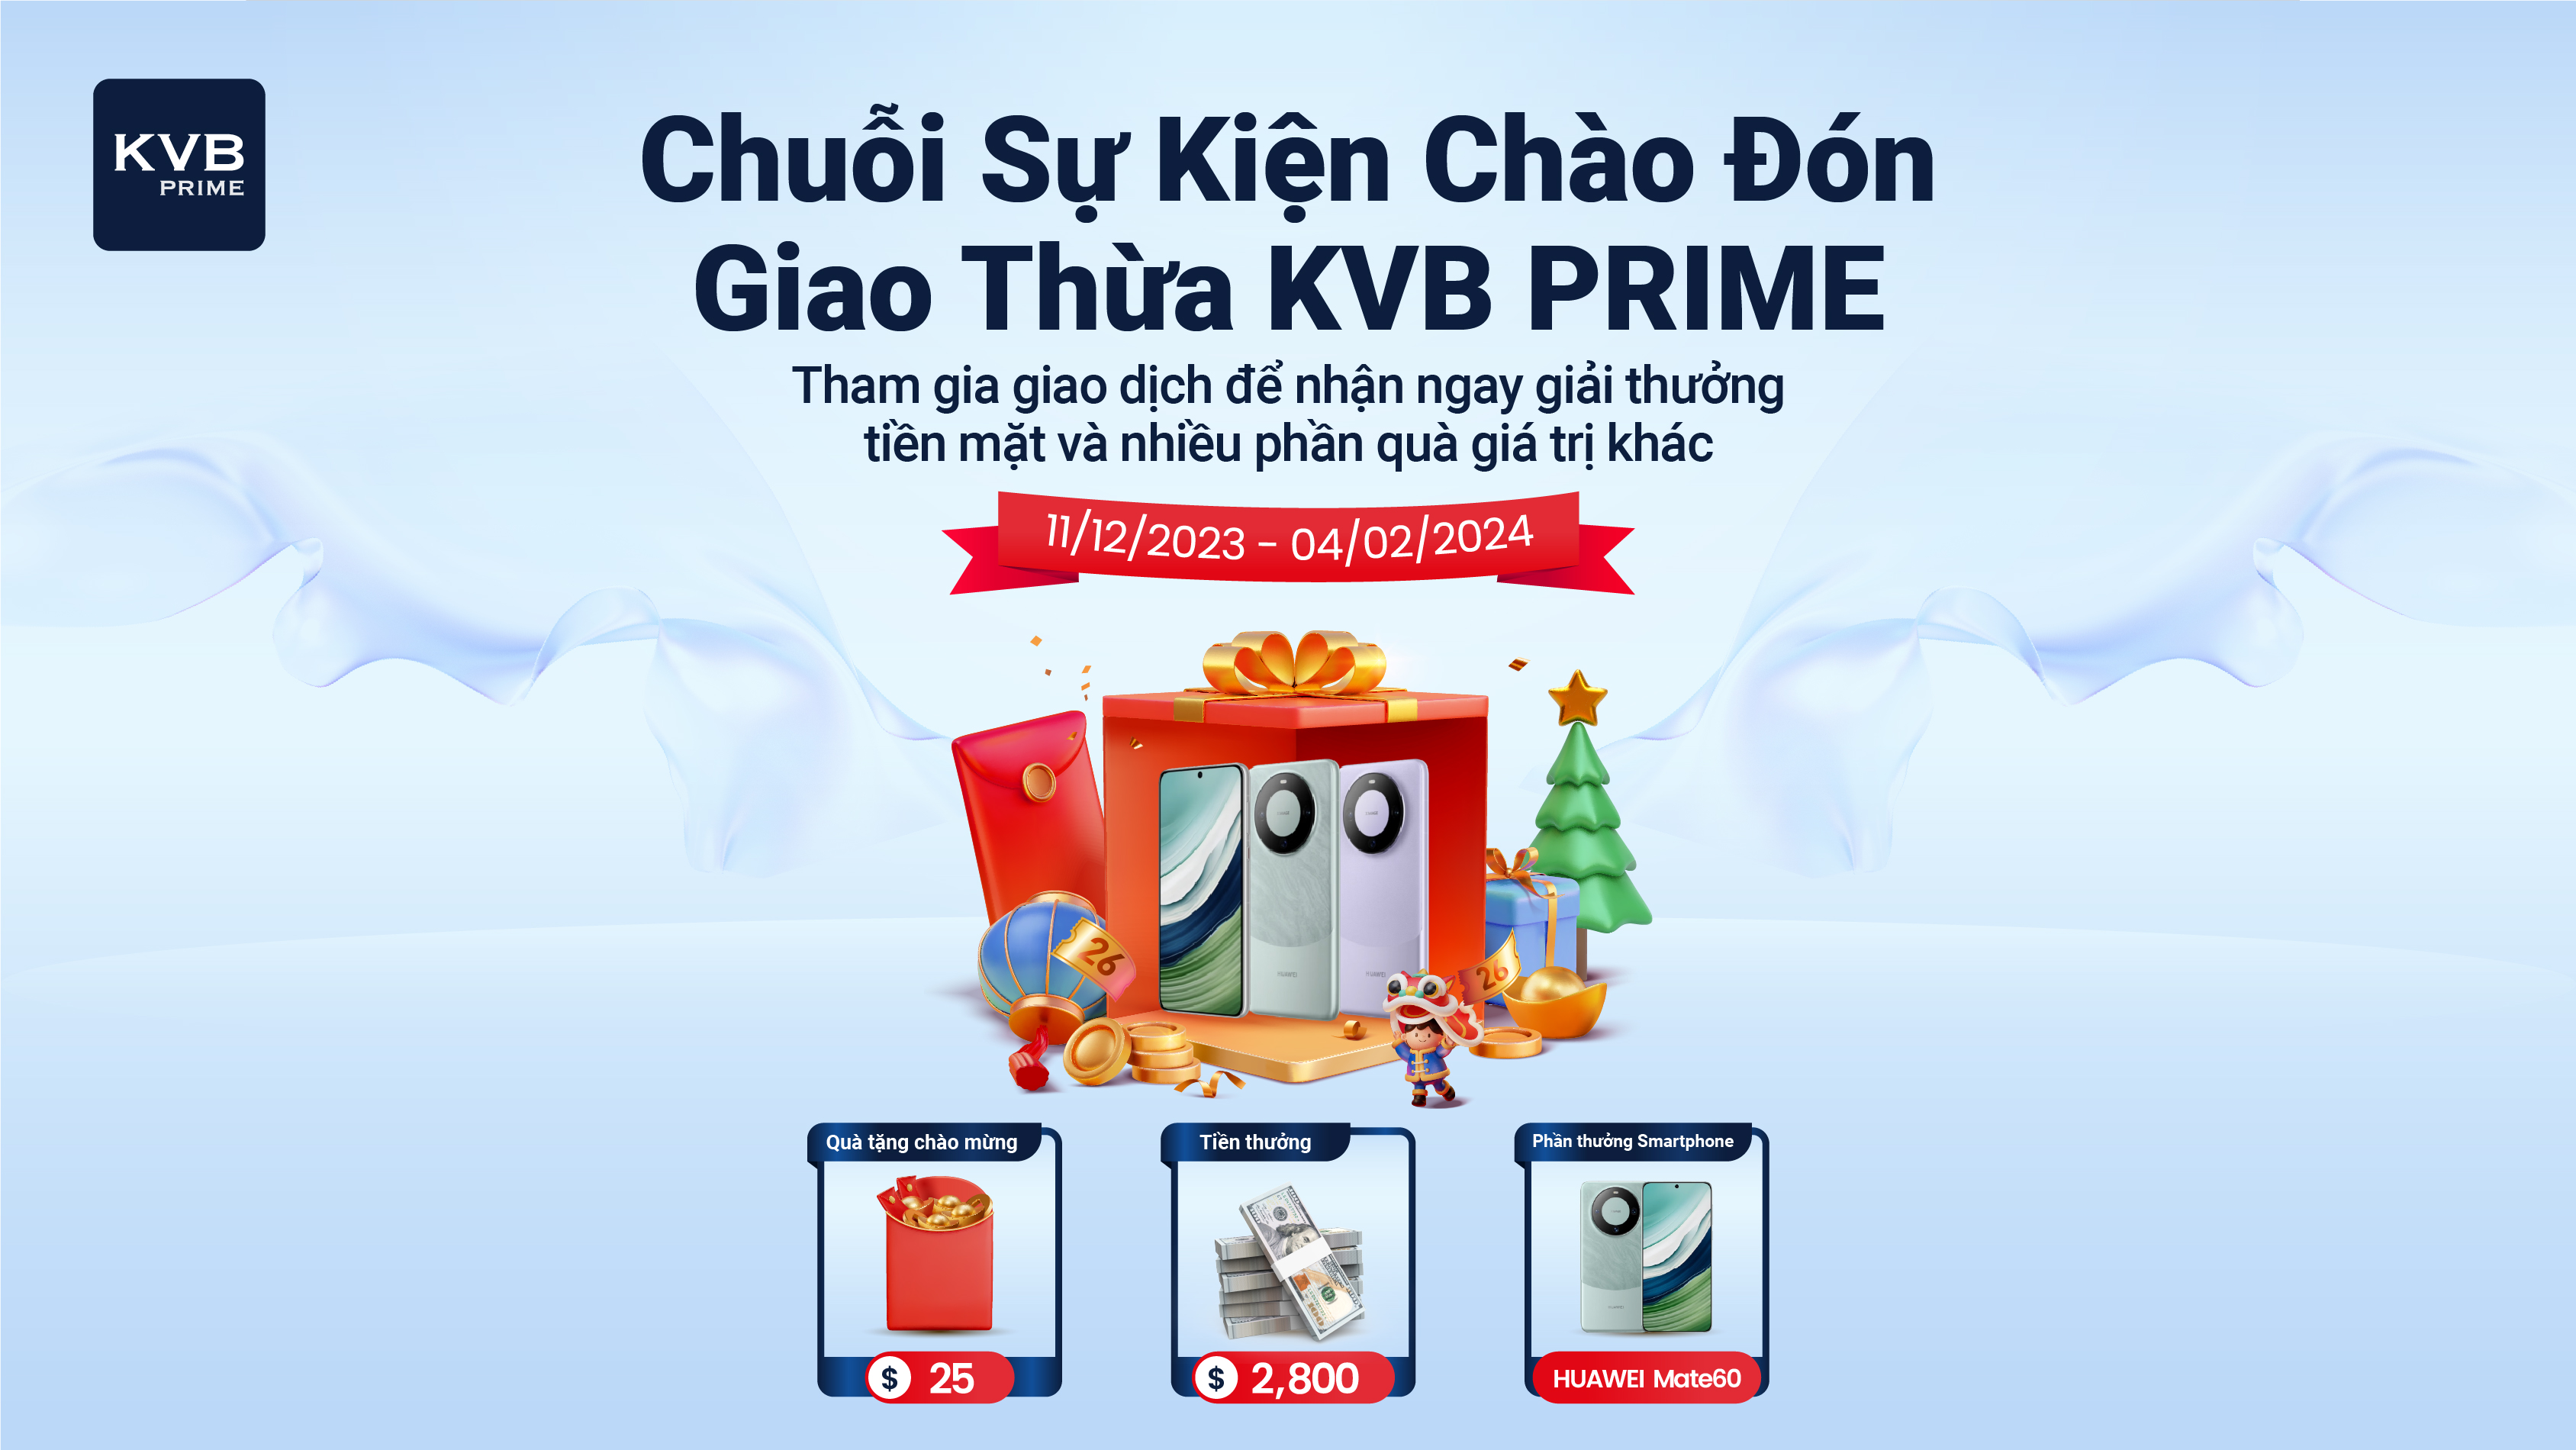 KVB PRIME New Year Event Series Ended | All Three Mobile Phone Prizes Awarded